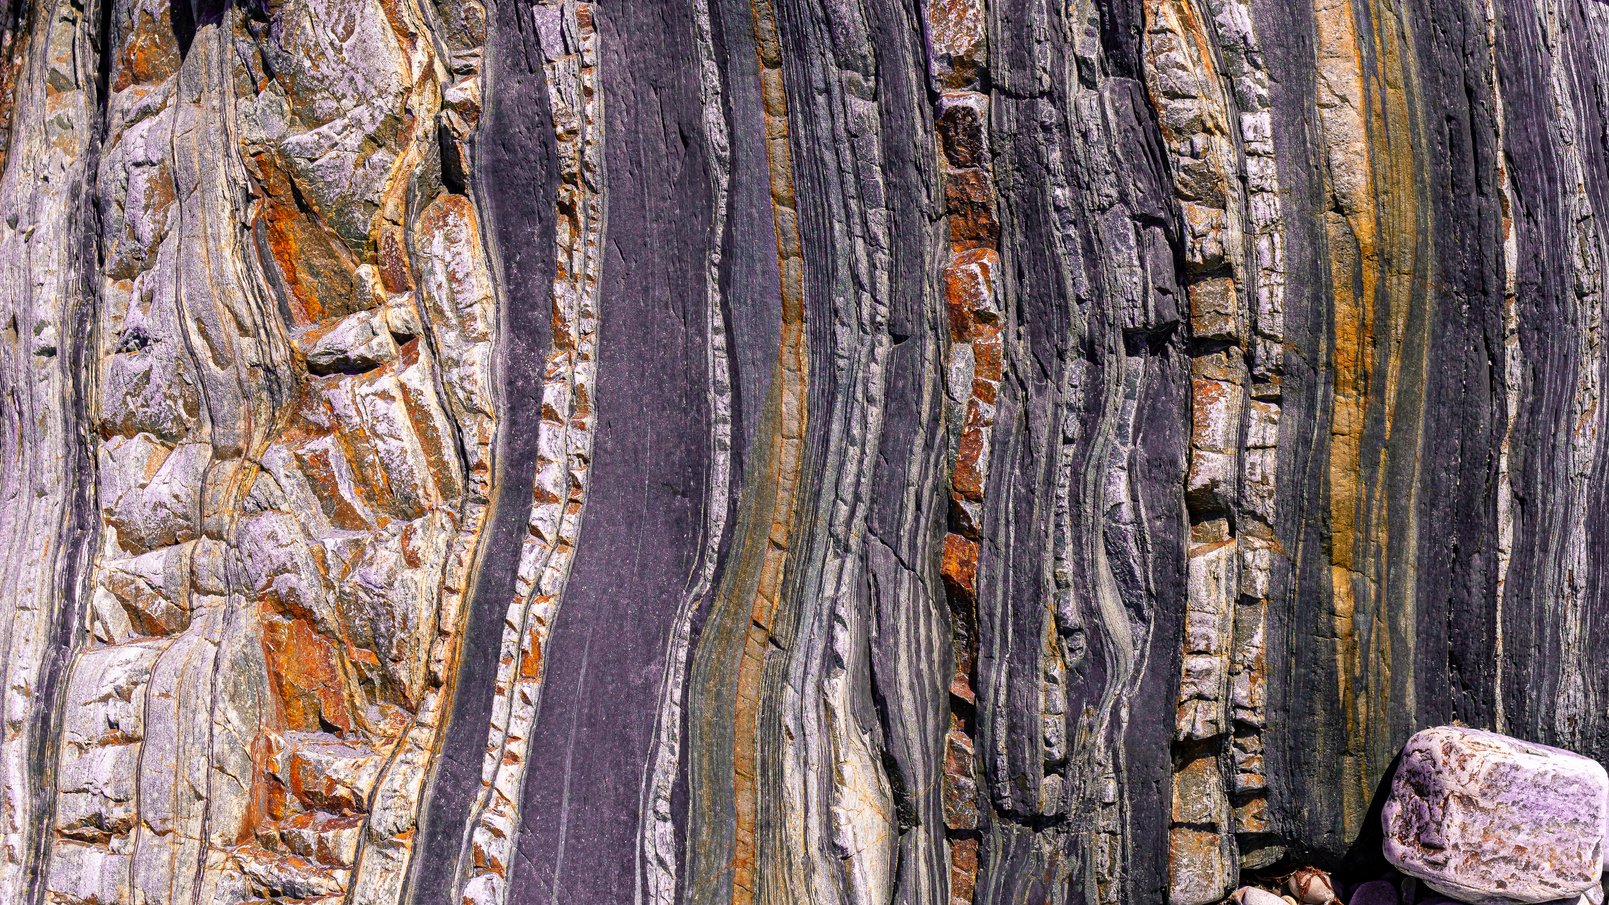 Rock Sediments and Layers